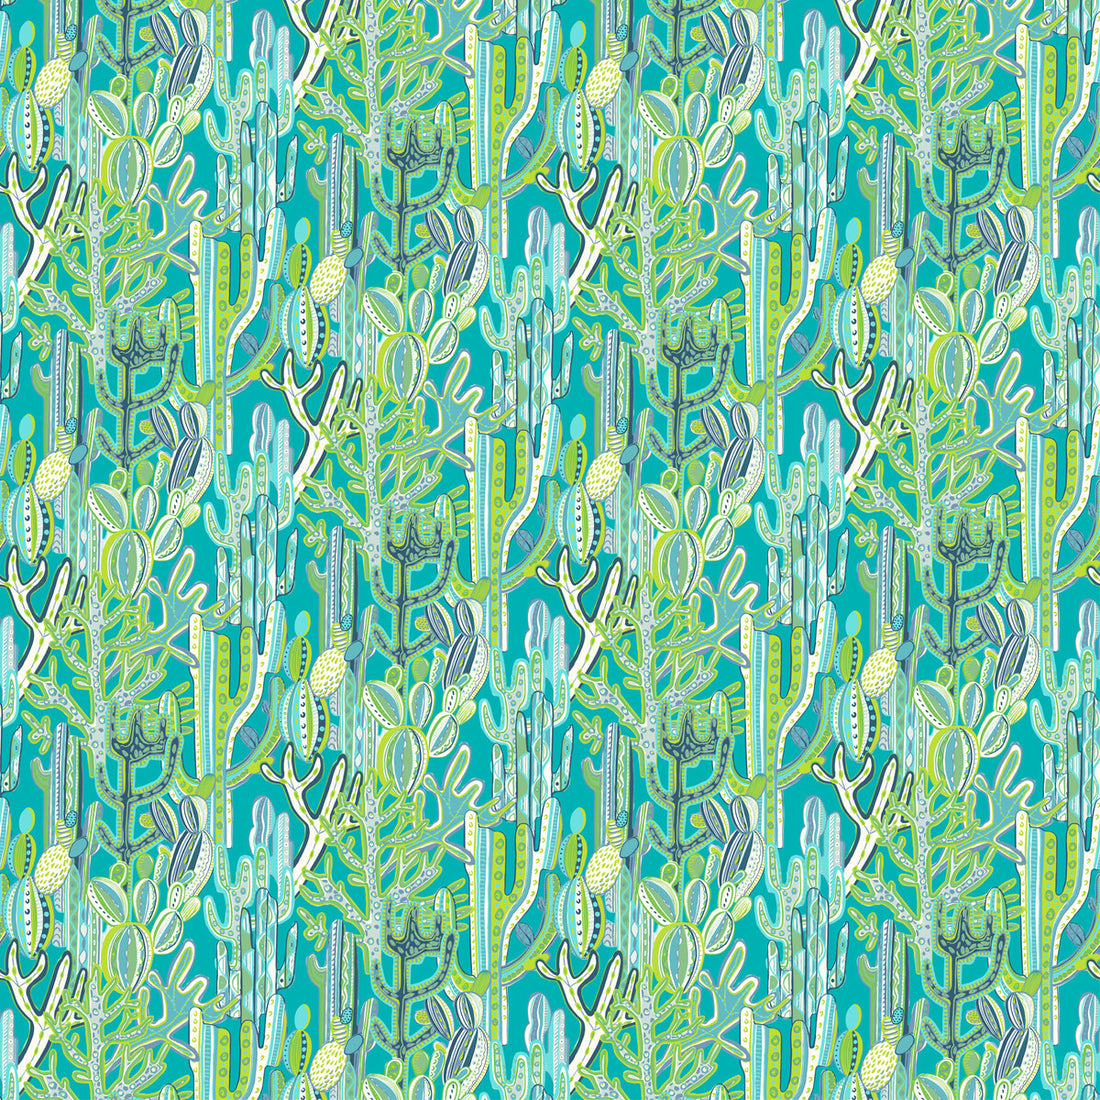 Cactus fabric in azul/verde color - pattern GDT5491.001.0 - by Gaston y Daniela in the Gaston Libreria collection